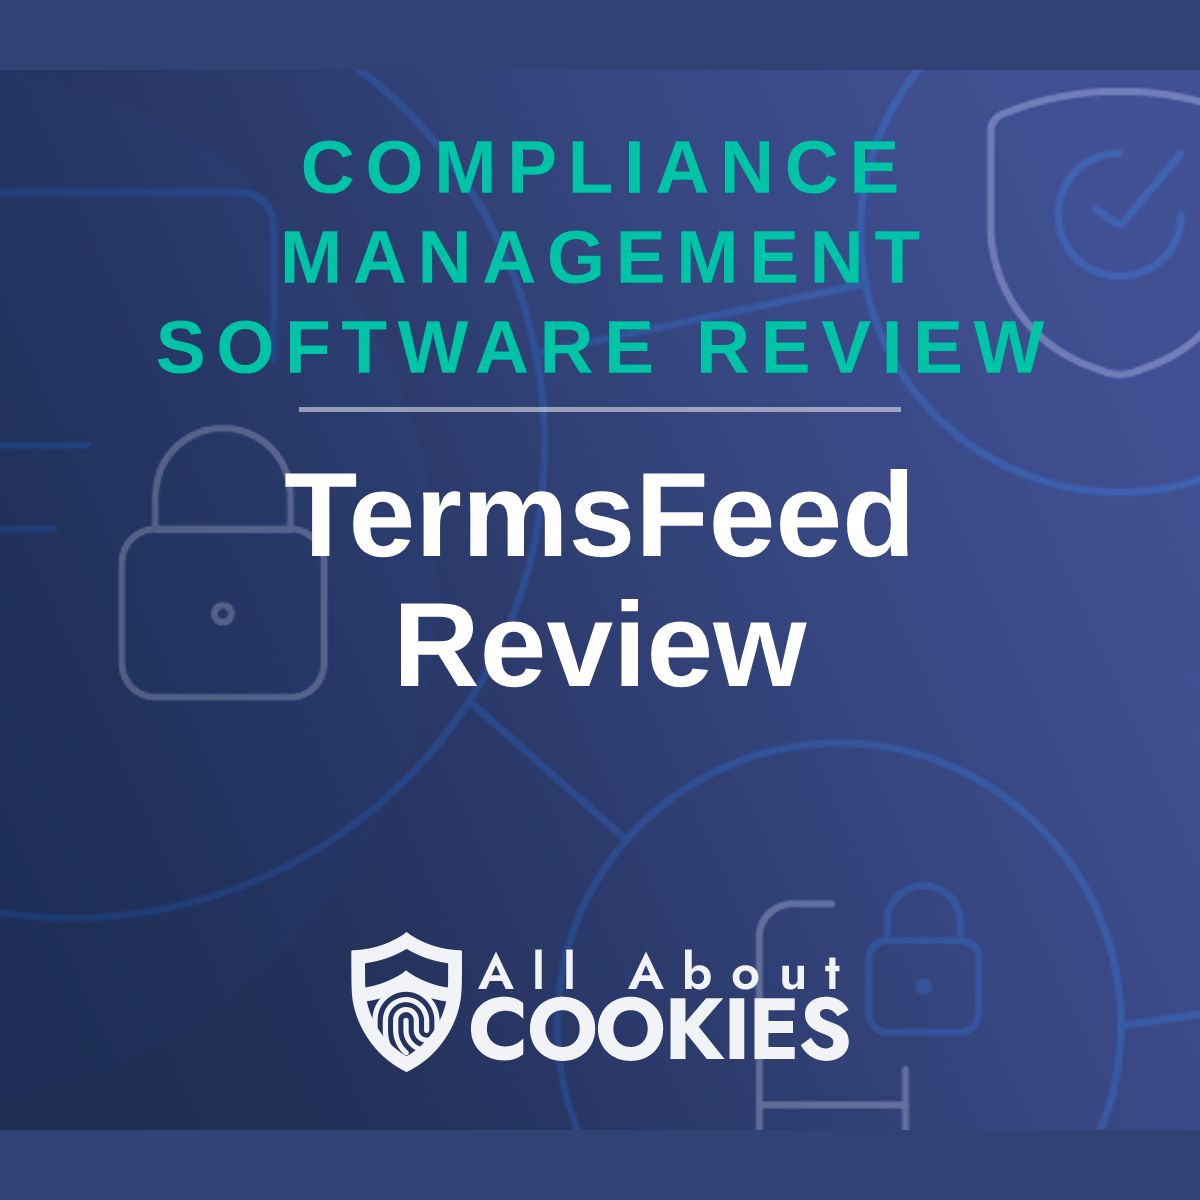 TermsFeed Review